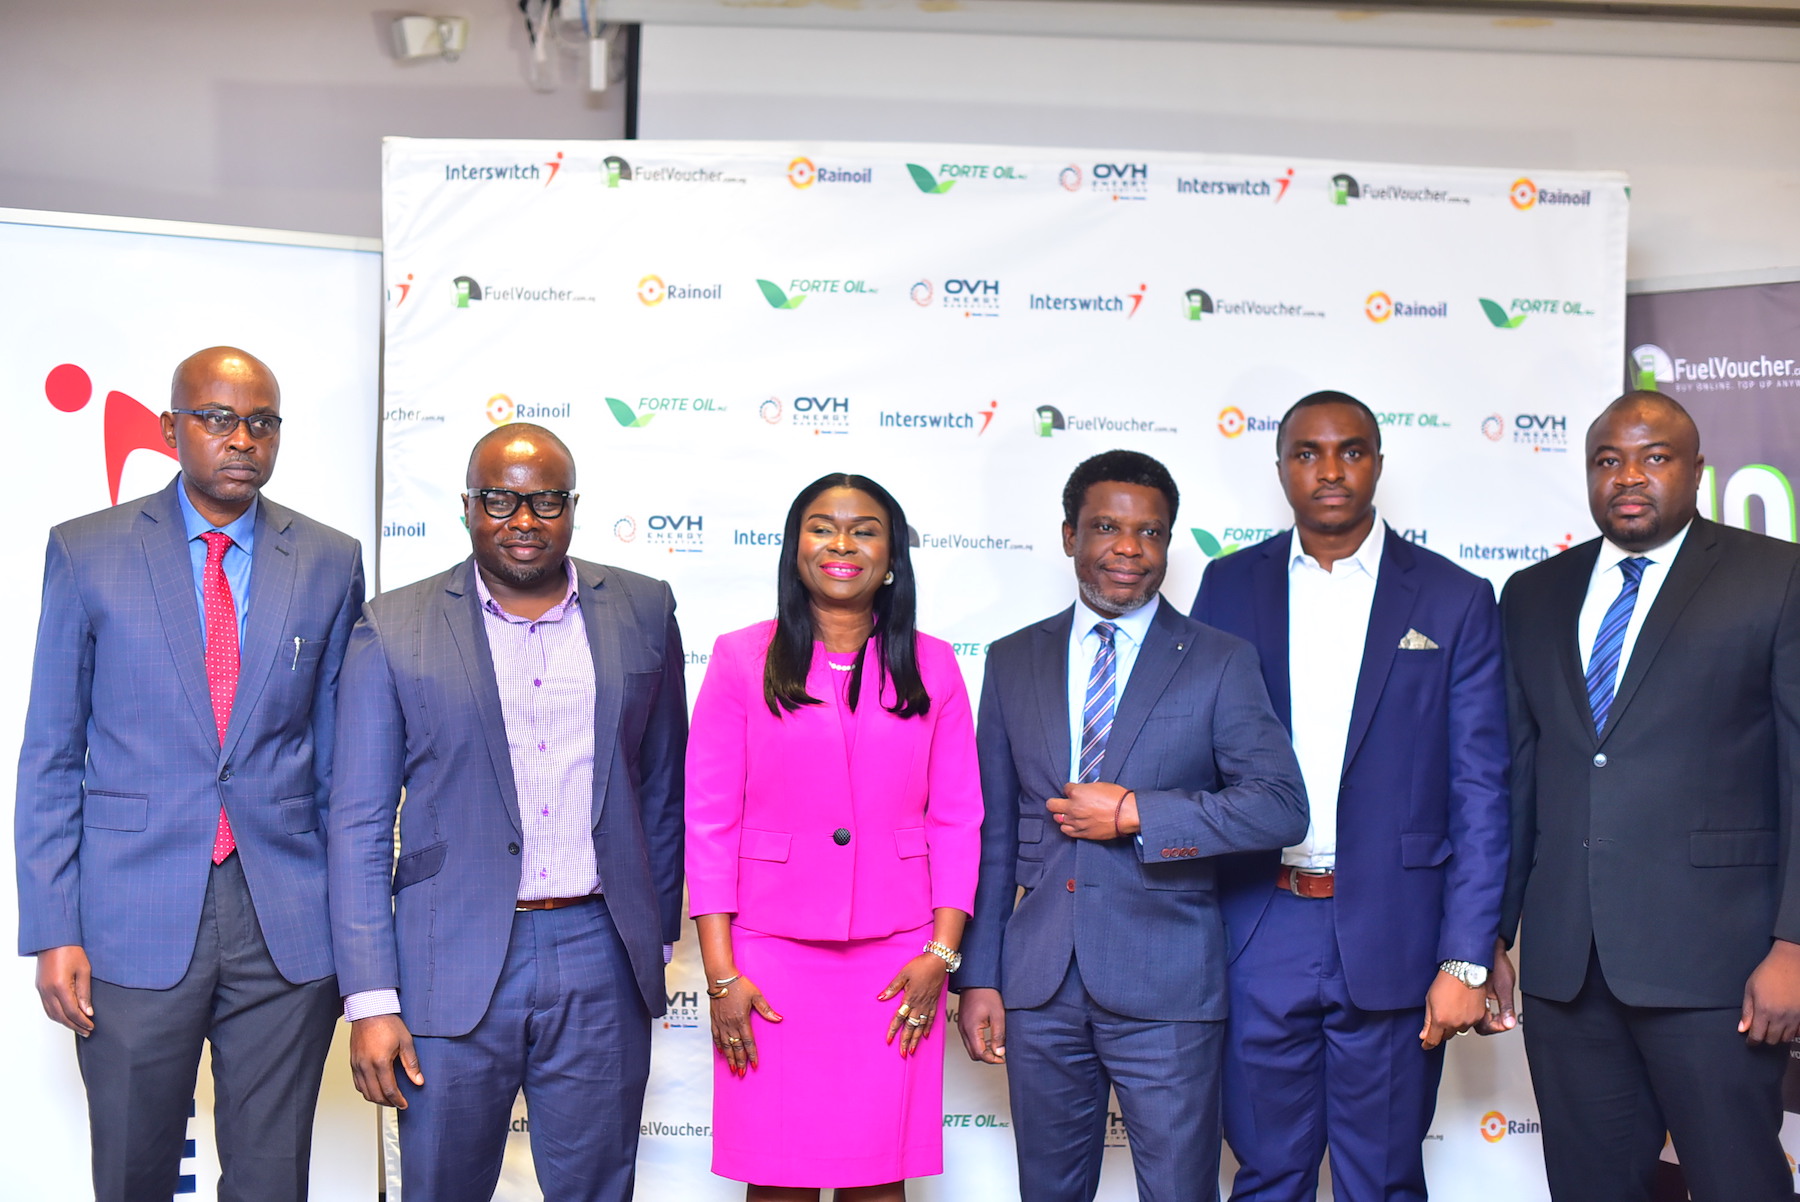 L-R: Kenneth Ndabai, Executive Director Operations at RainOil; Chimezie Emewulu, CEO of Seamfix/EVSL; Chinyere Don-Okhuofu, Divisional CEO of Interswitch Industry Vertical Markets, Paul Ohakim, Group Head Industry and Retail Chains at Interswitch; Mr. Chibuzor Onwurah, Co-founder, Seamfix/EVSL and Mr. Ayuba Loko, Head, Retail and Commercial Sales at RainOil 